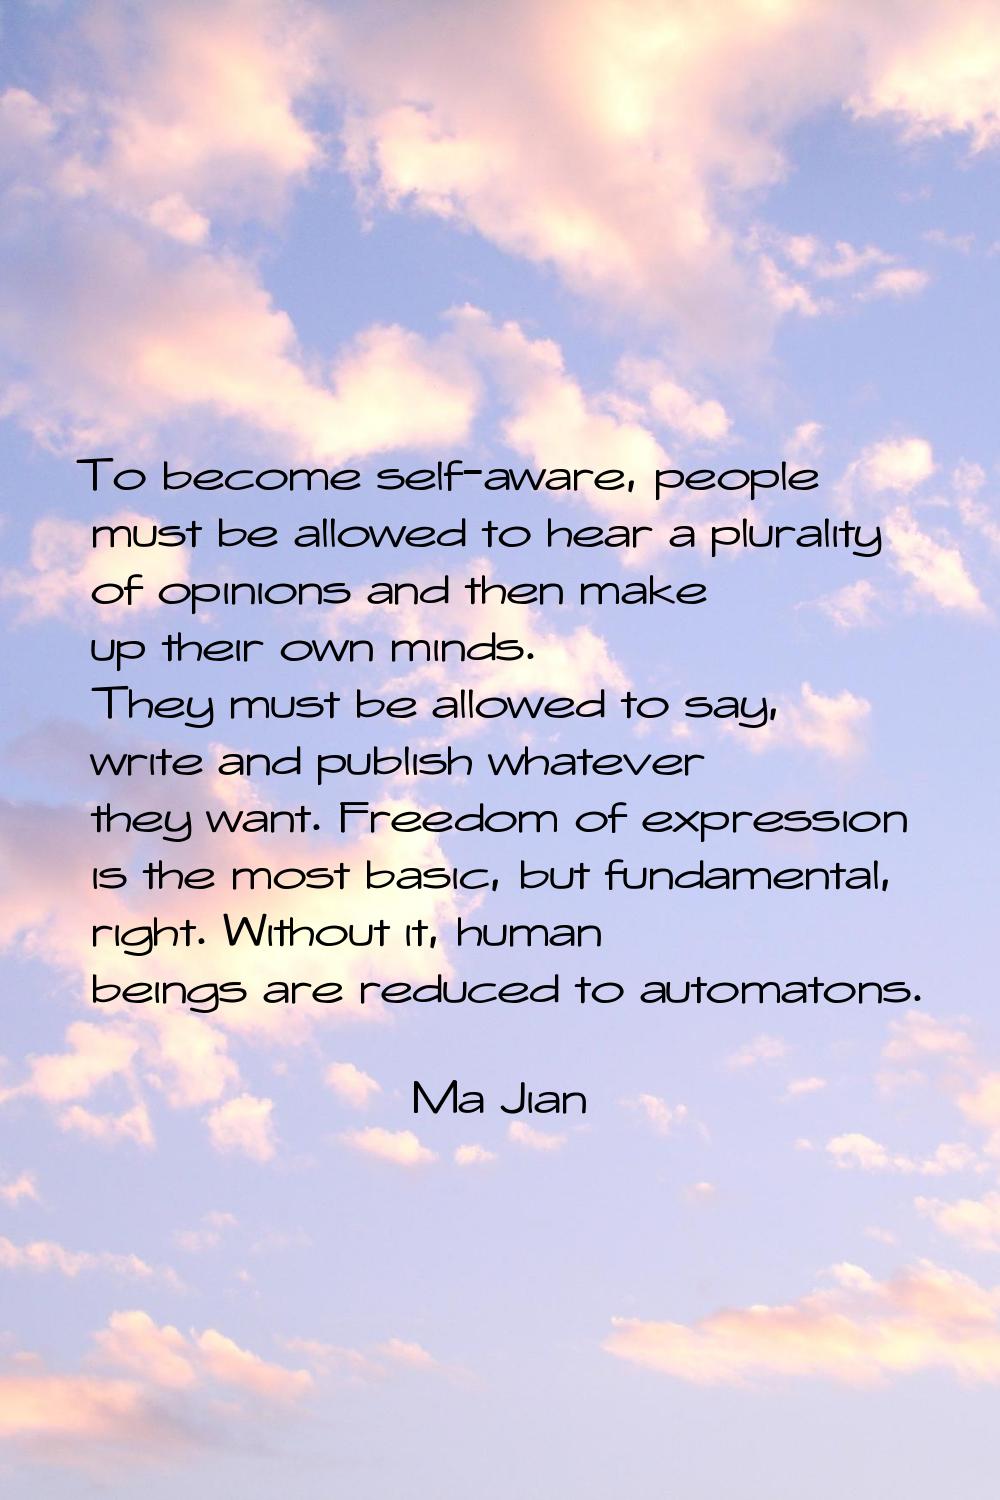 To become self-aware, people must be allowed to hear a plurality of opinions and then make up their